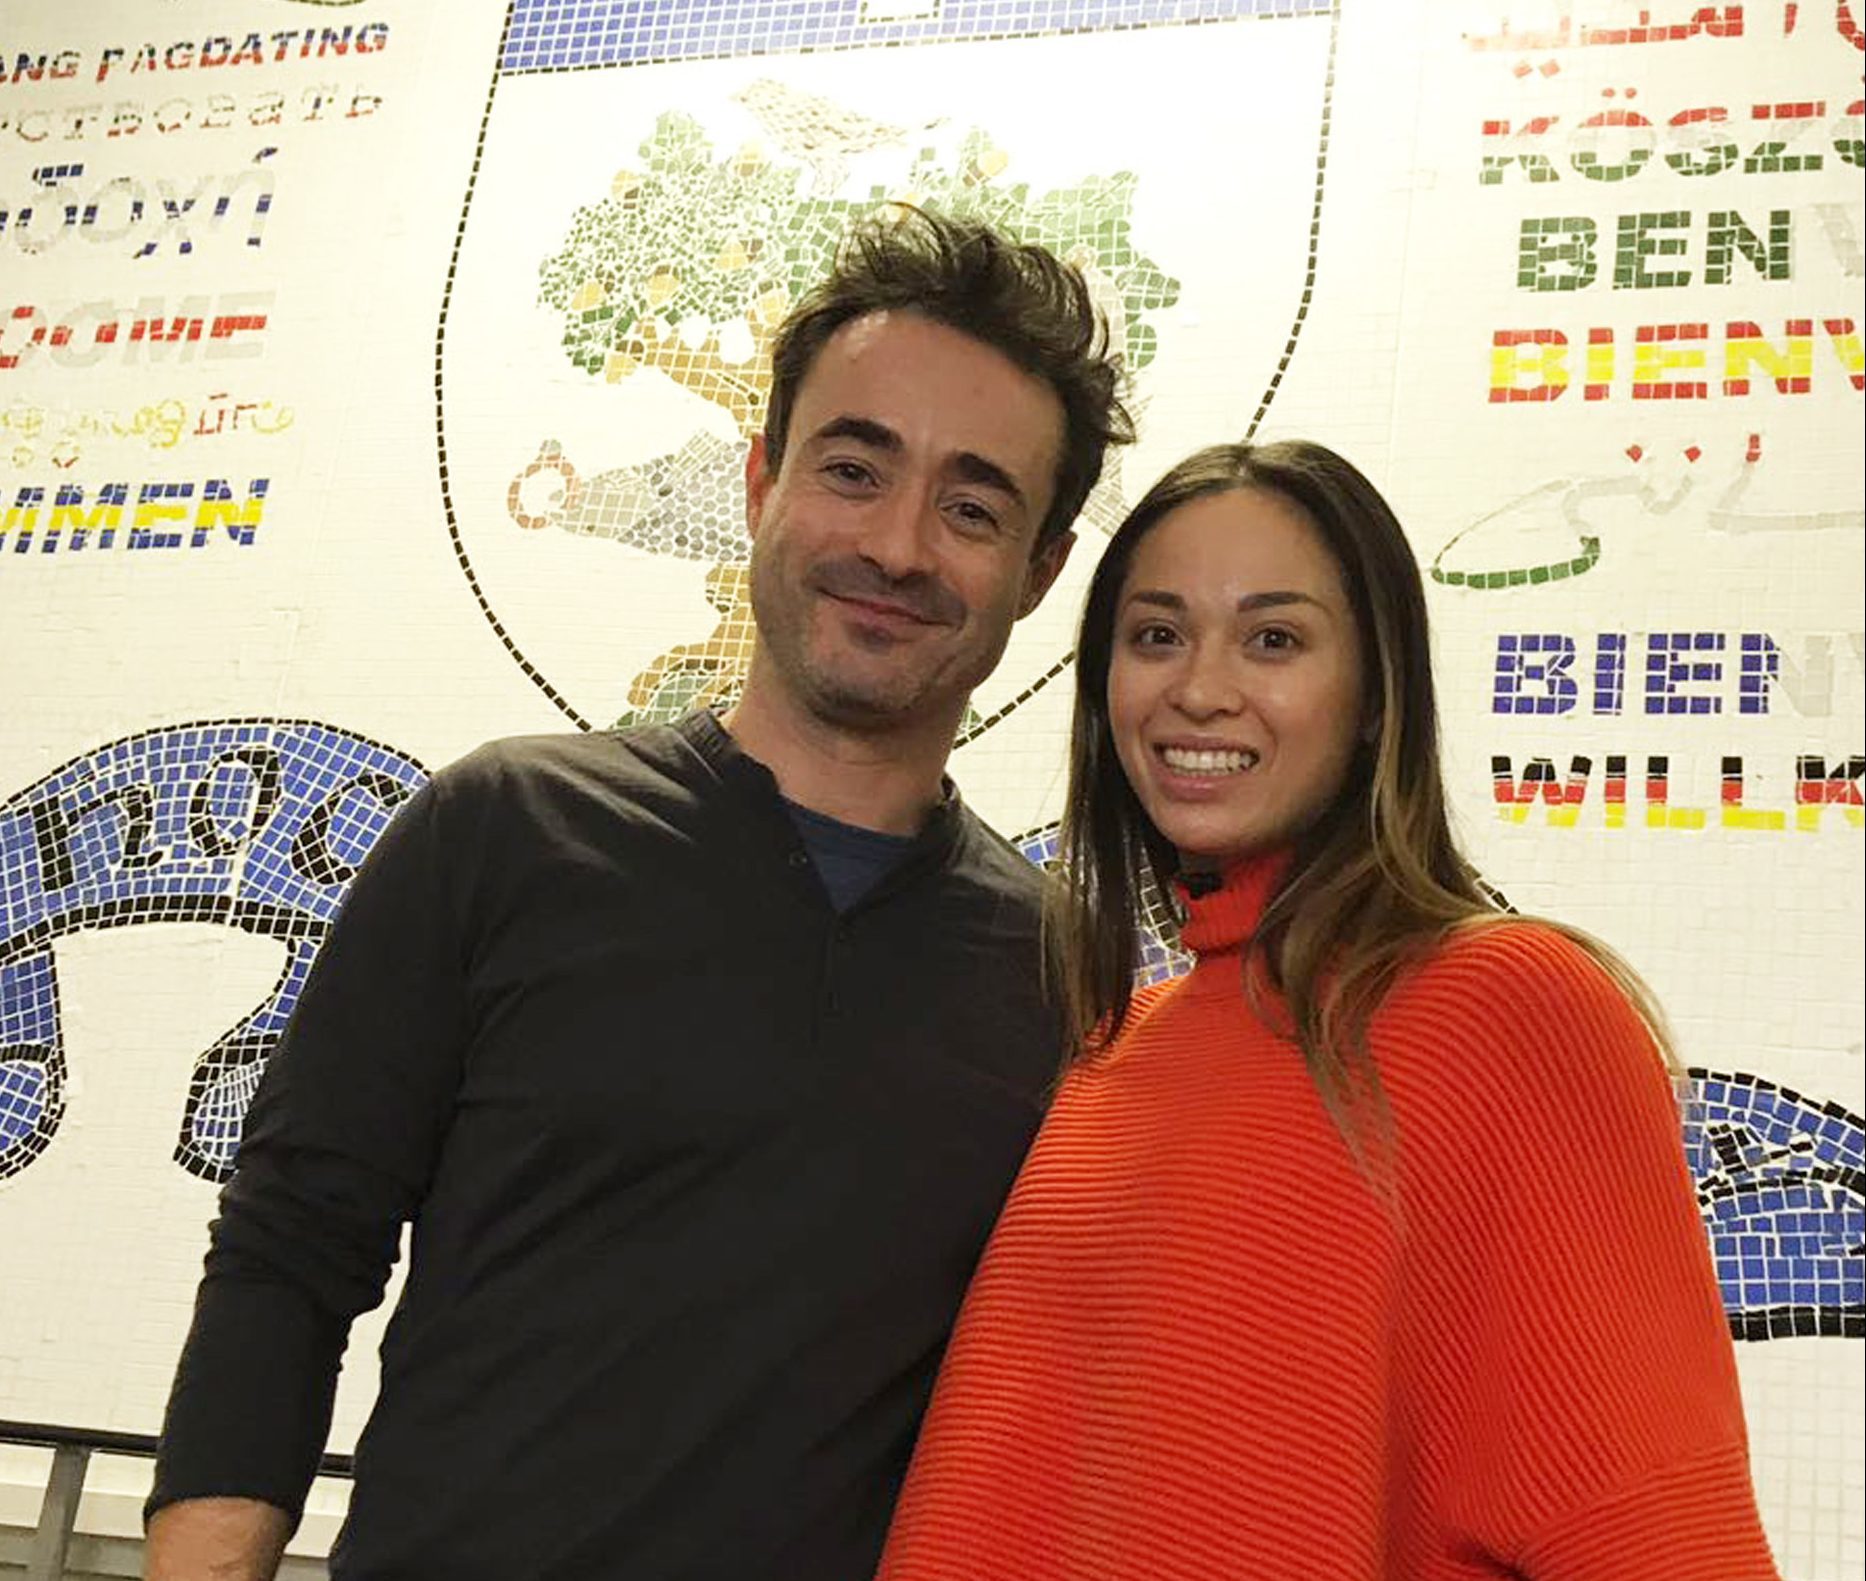 Joe McFadden with with his Strictly dance partner Katya Jones, during a visit to his old school, Holyrood Secondary School in Glasgow. (BBC/PA Wire)